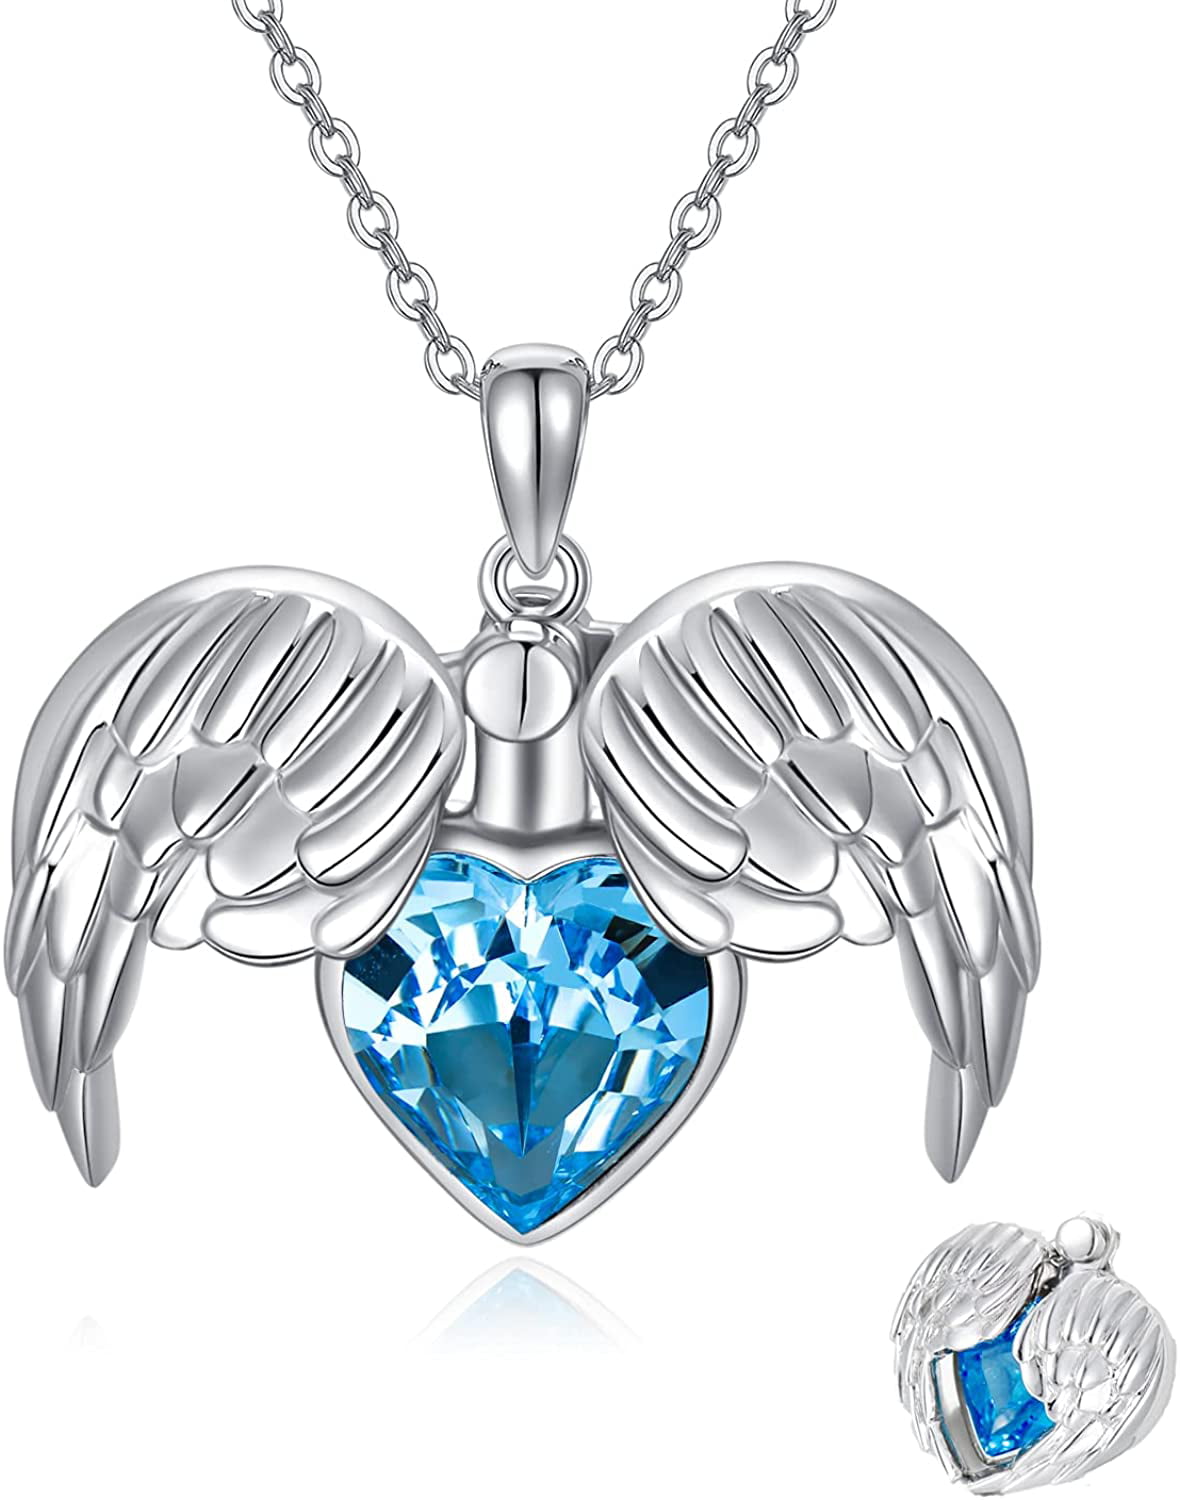 Heart Cremation Jewelry for Ashes Angel Wing Urn Necklace Electrocardiogram Memorial Pendant and Birthstone Crystal I Love You Forever